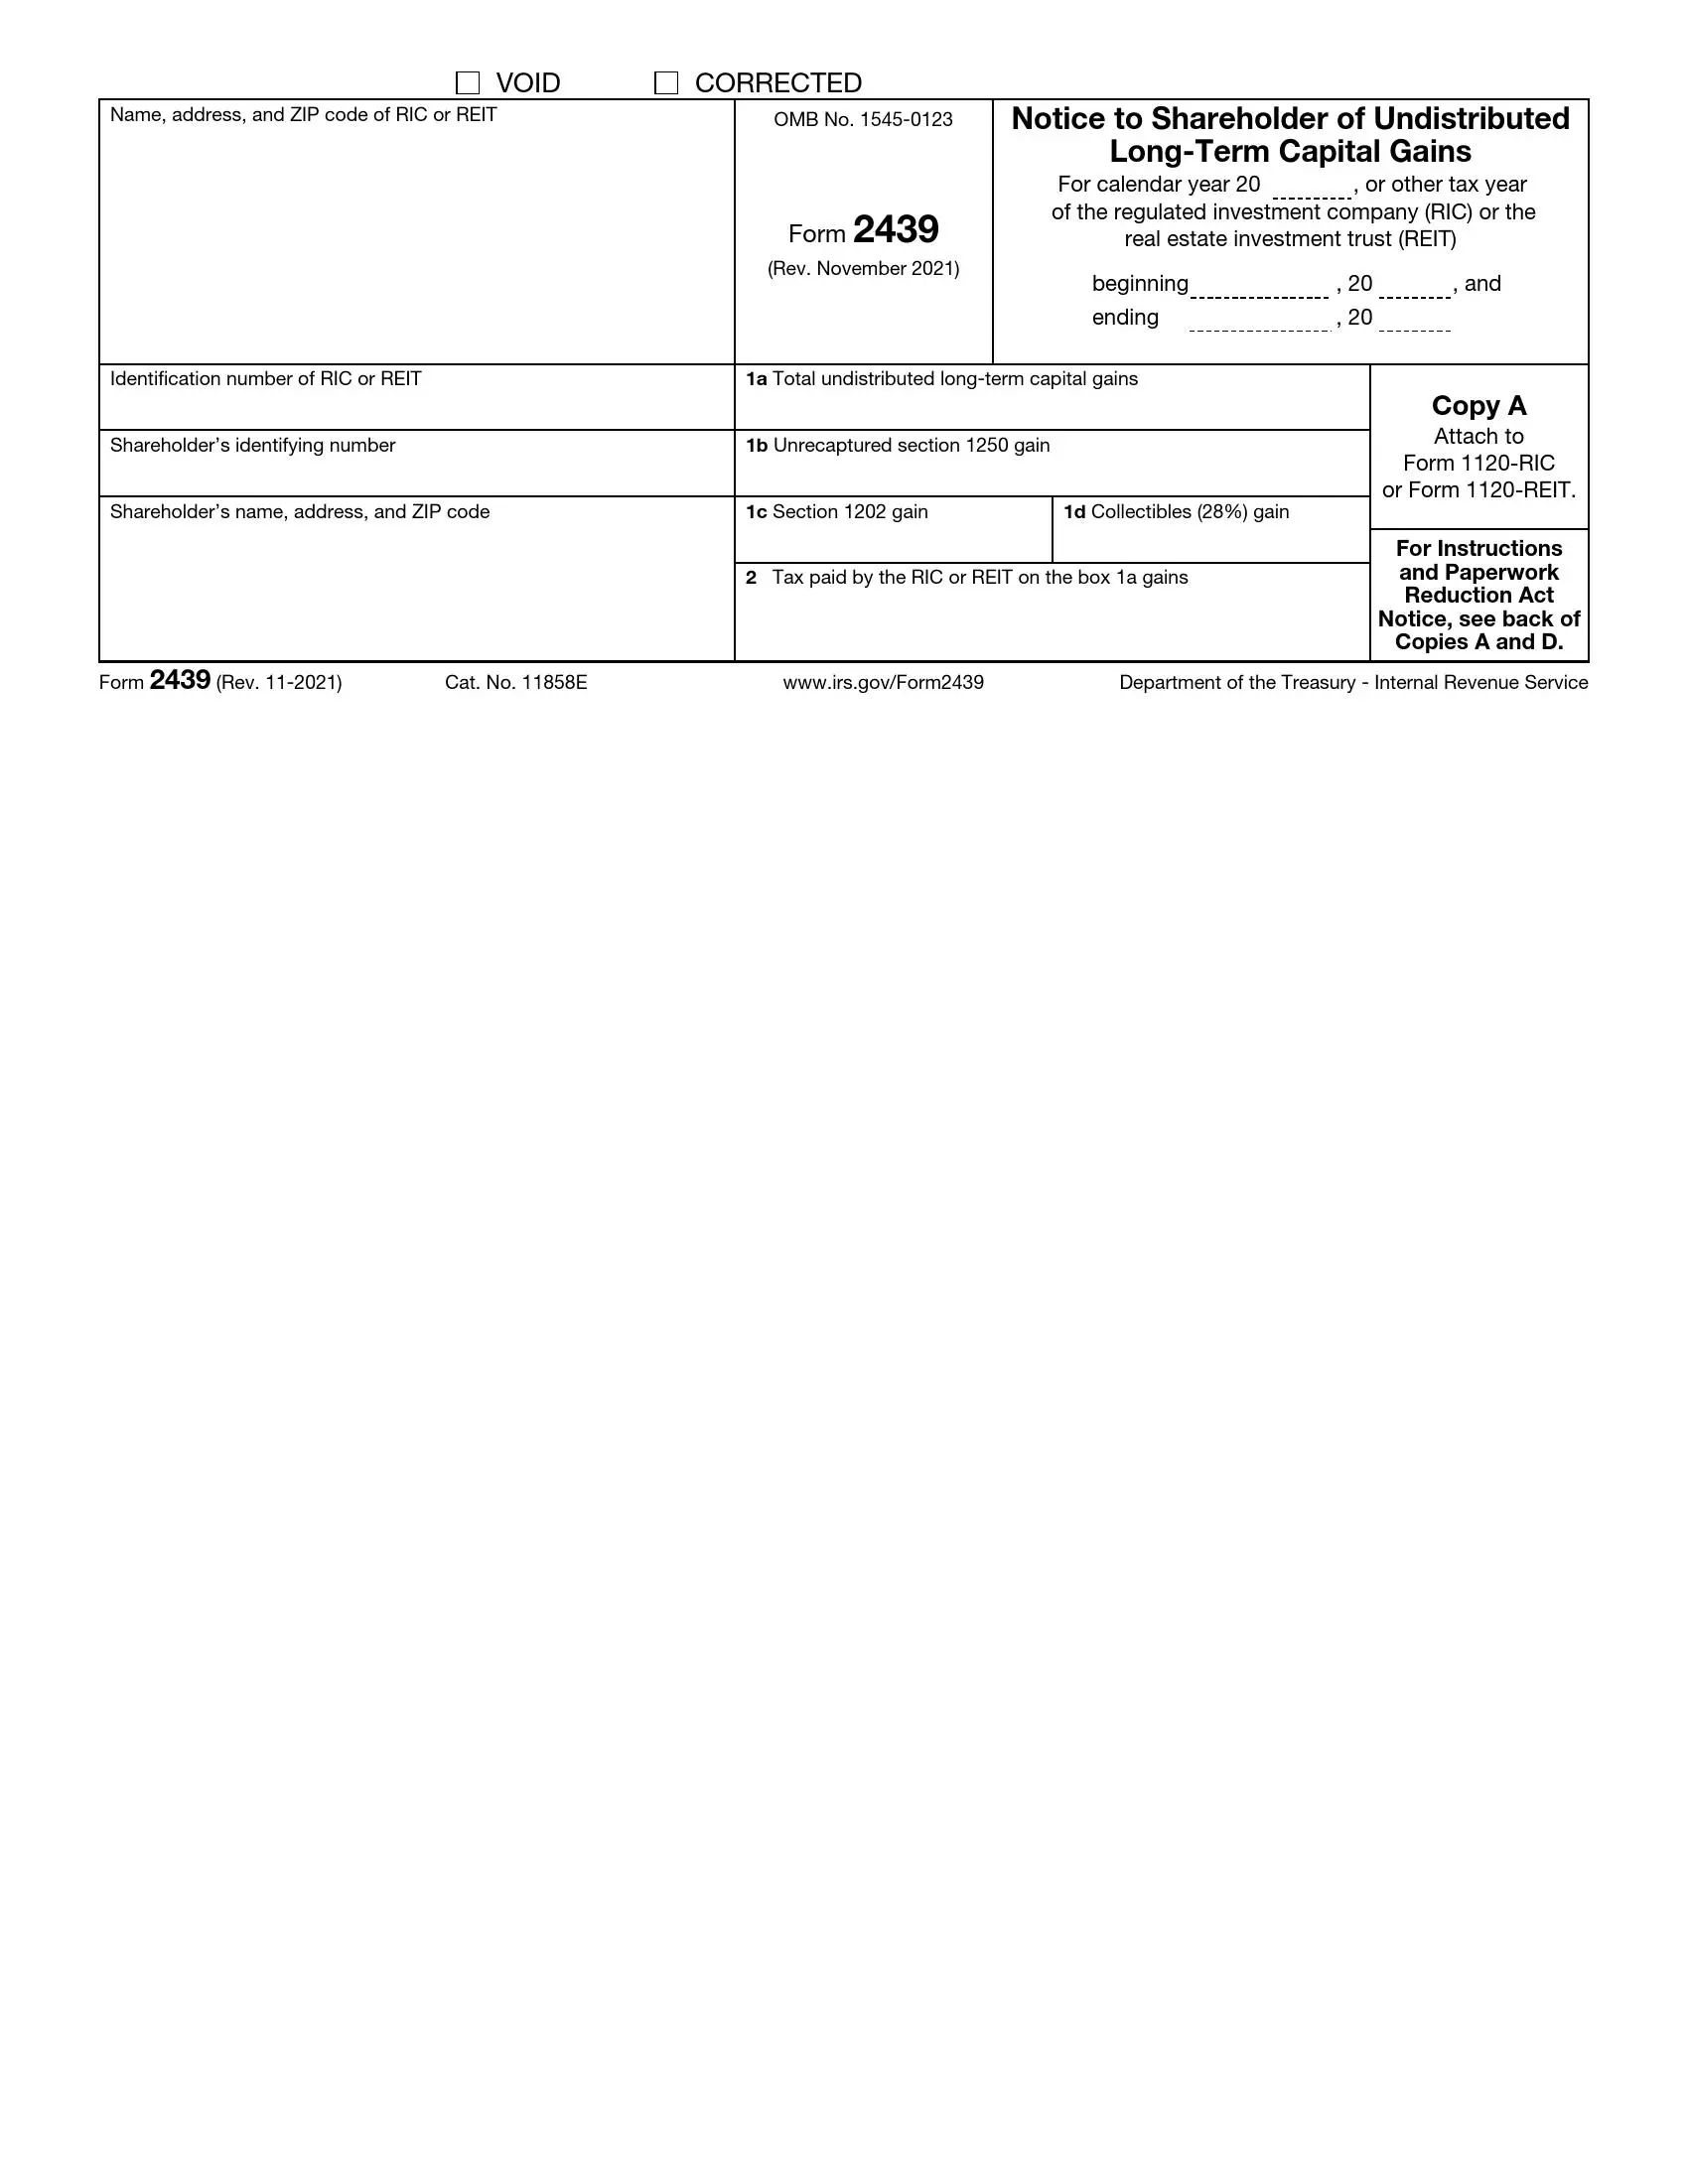 irs form 2439 rev 11 2021 preview